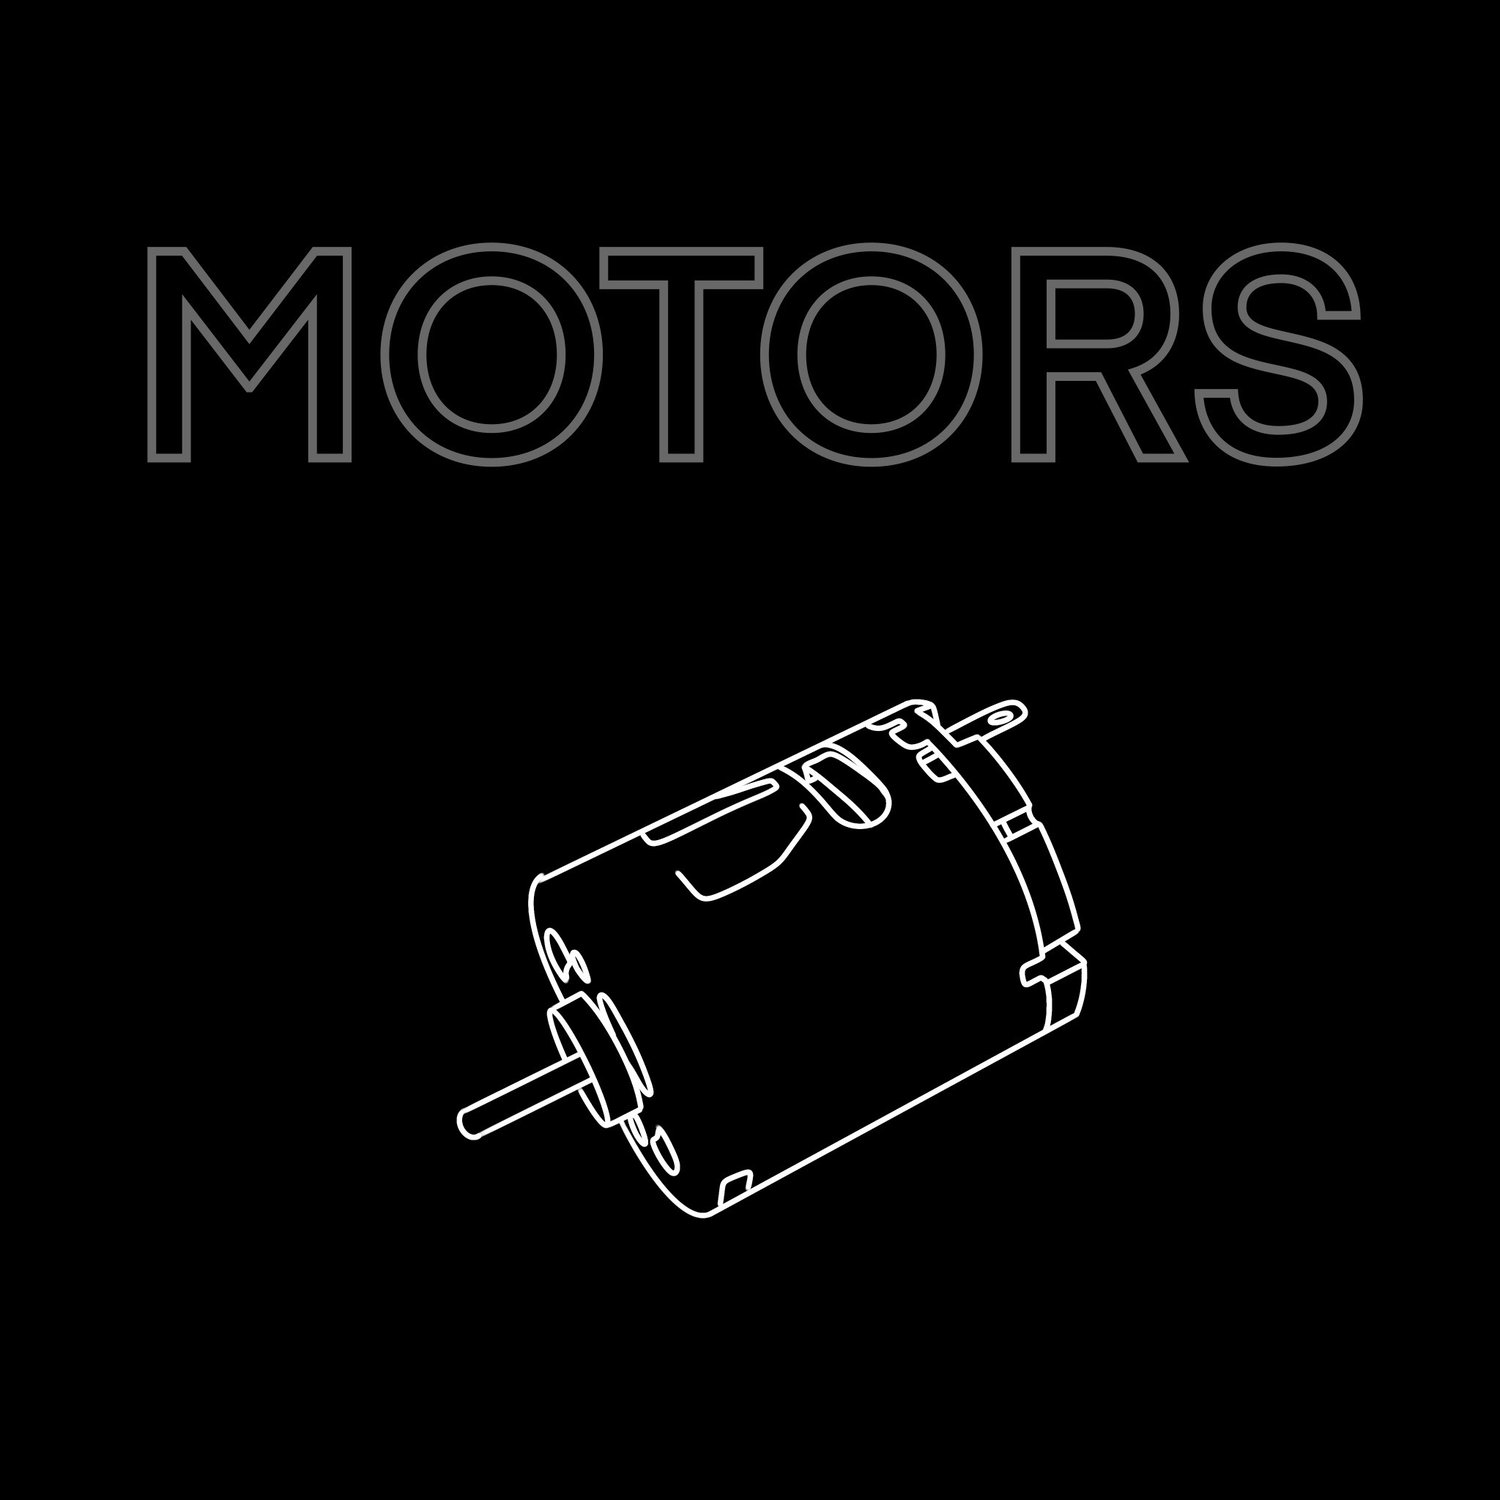 Motors and spares